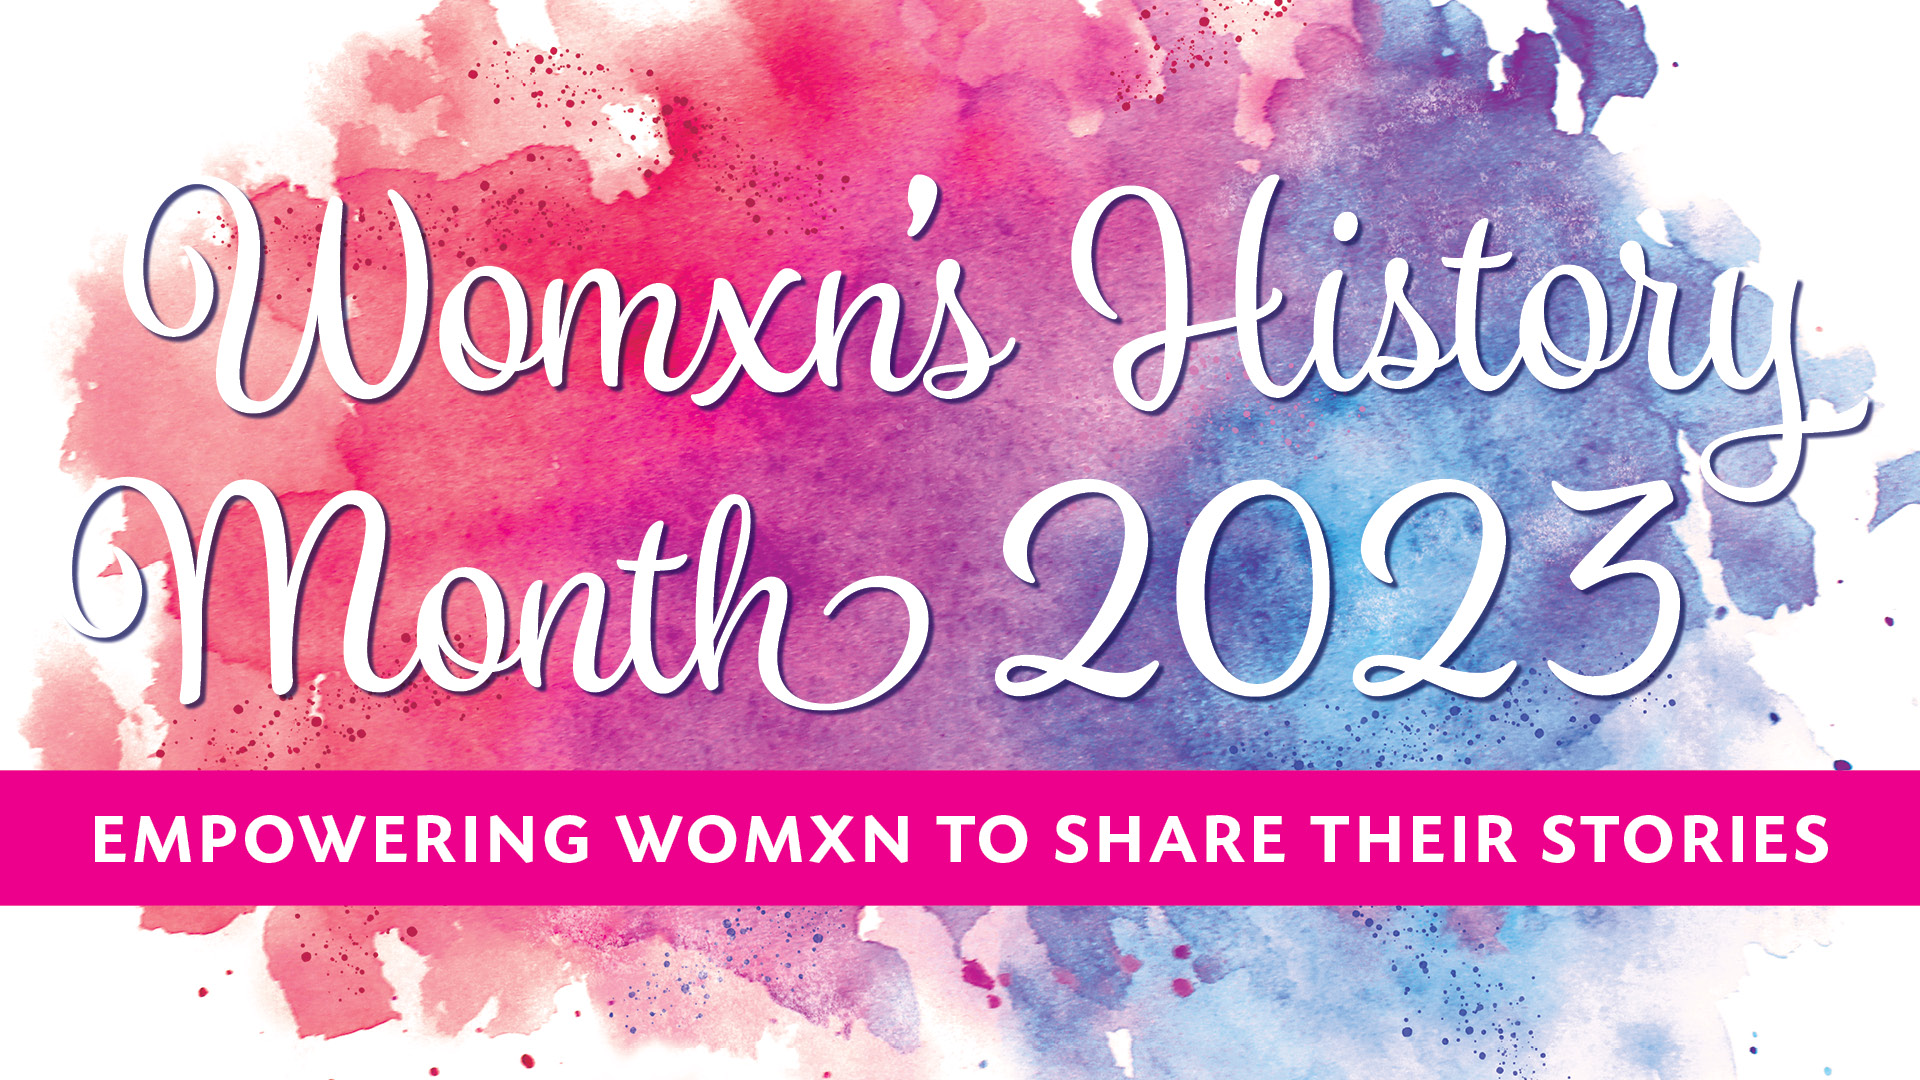 Womxn's History Month 2022, Empowering womxn to share their stories